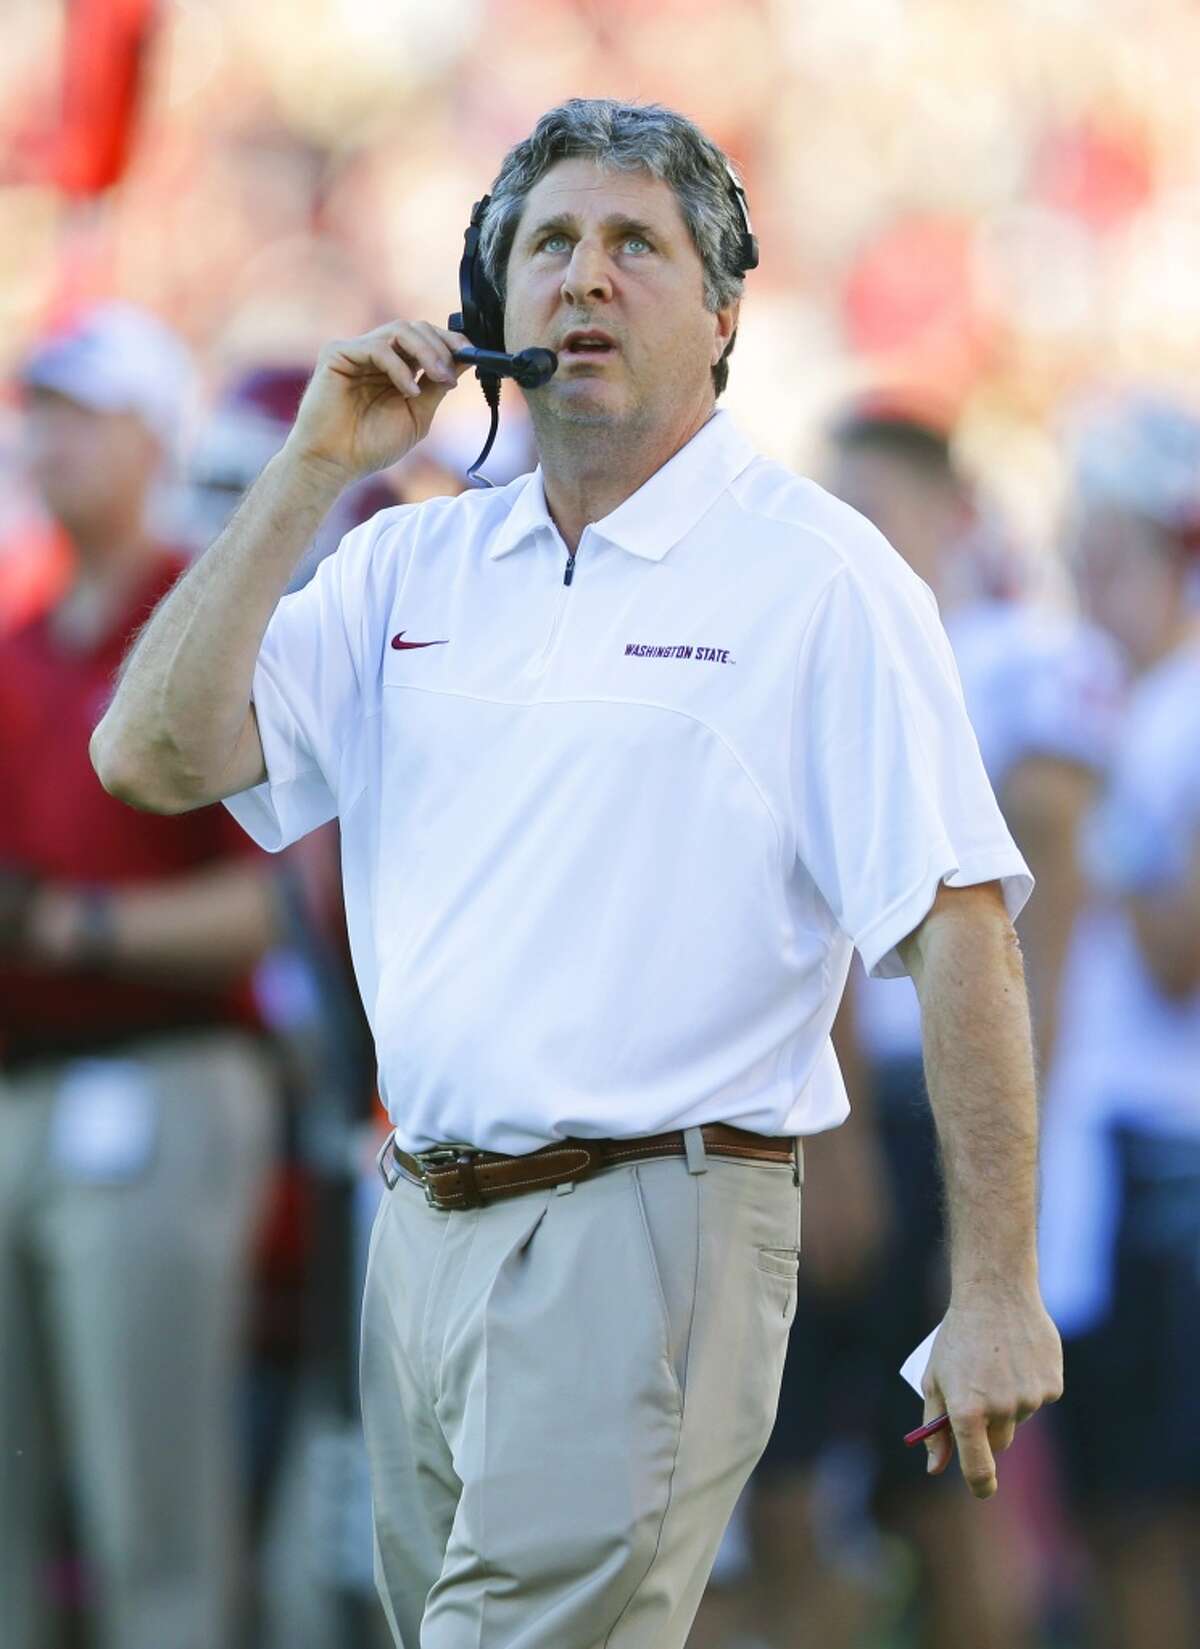 Washington State head coach Mike Leach watches the time clock from the sideline as his team plays Stanford during the first half of an NCAA college football game in Stanford, Calif., Saturday, Oct. 27, 2012. (AP Photo/Marcio Jose Sanchez)